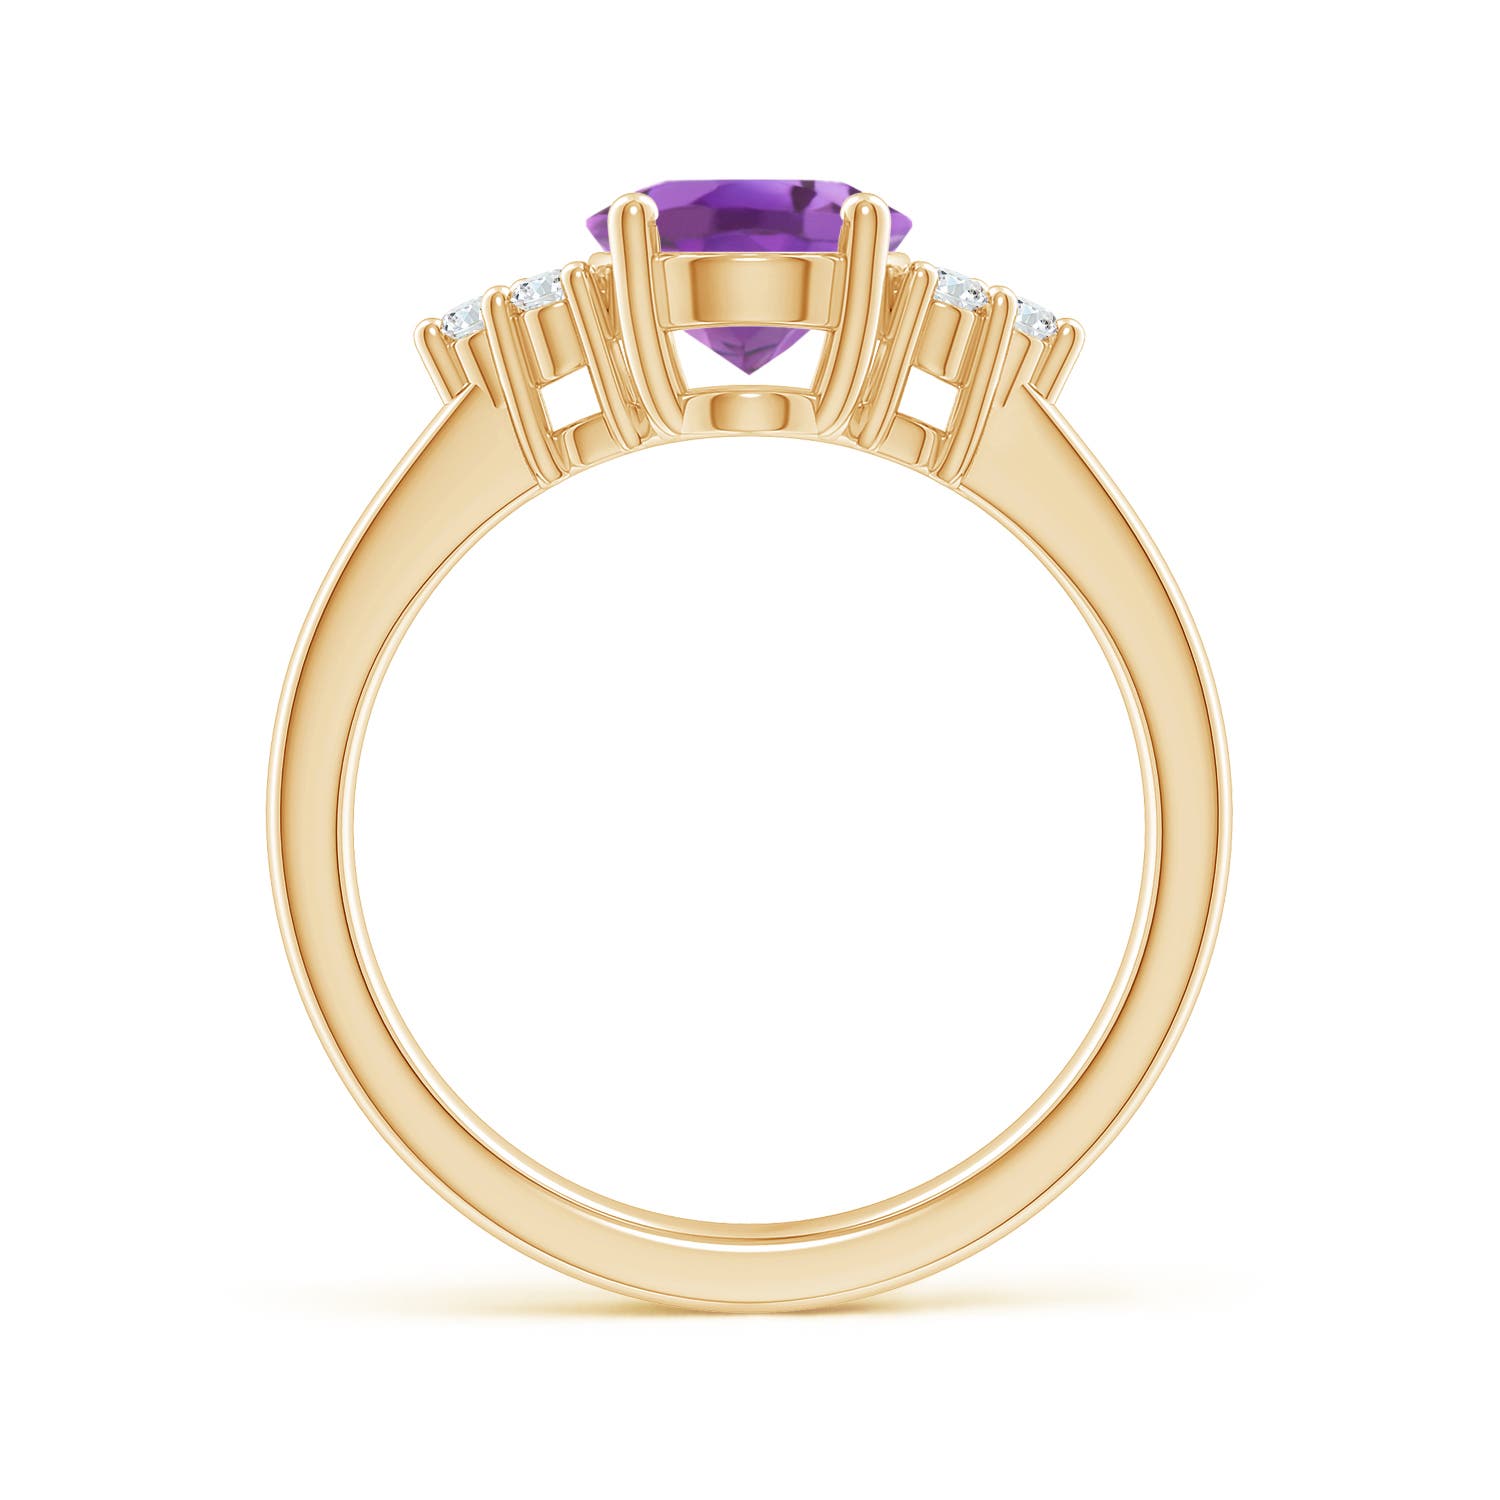 A - Amethyst / 1.75 CT / 14 KT Yellow Gold